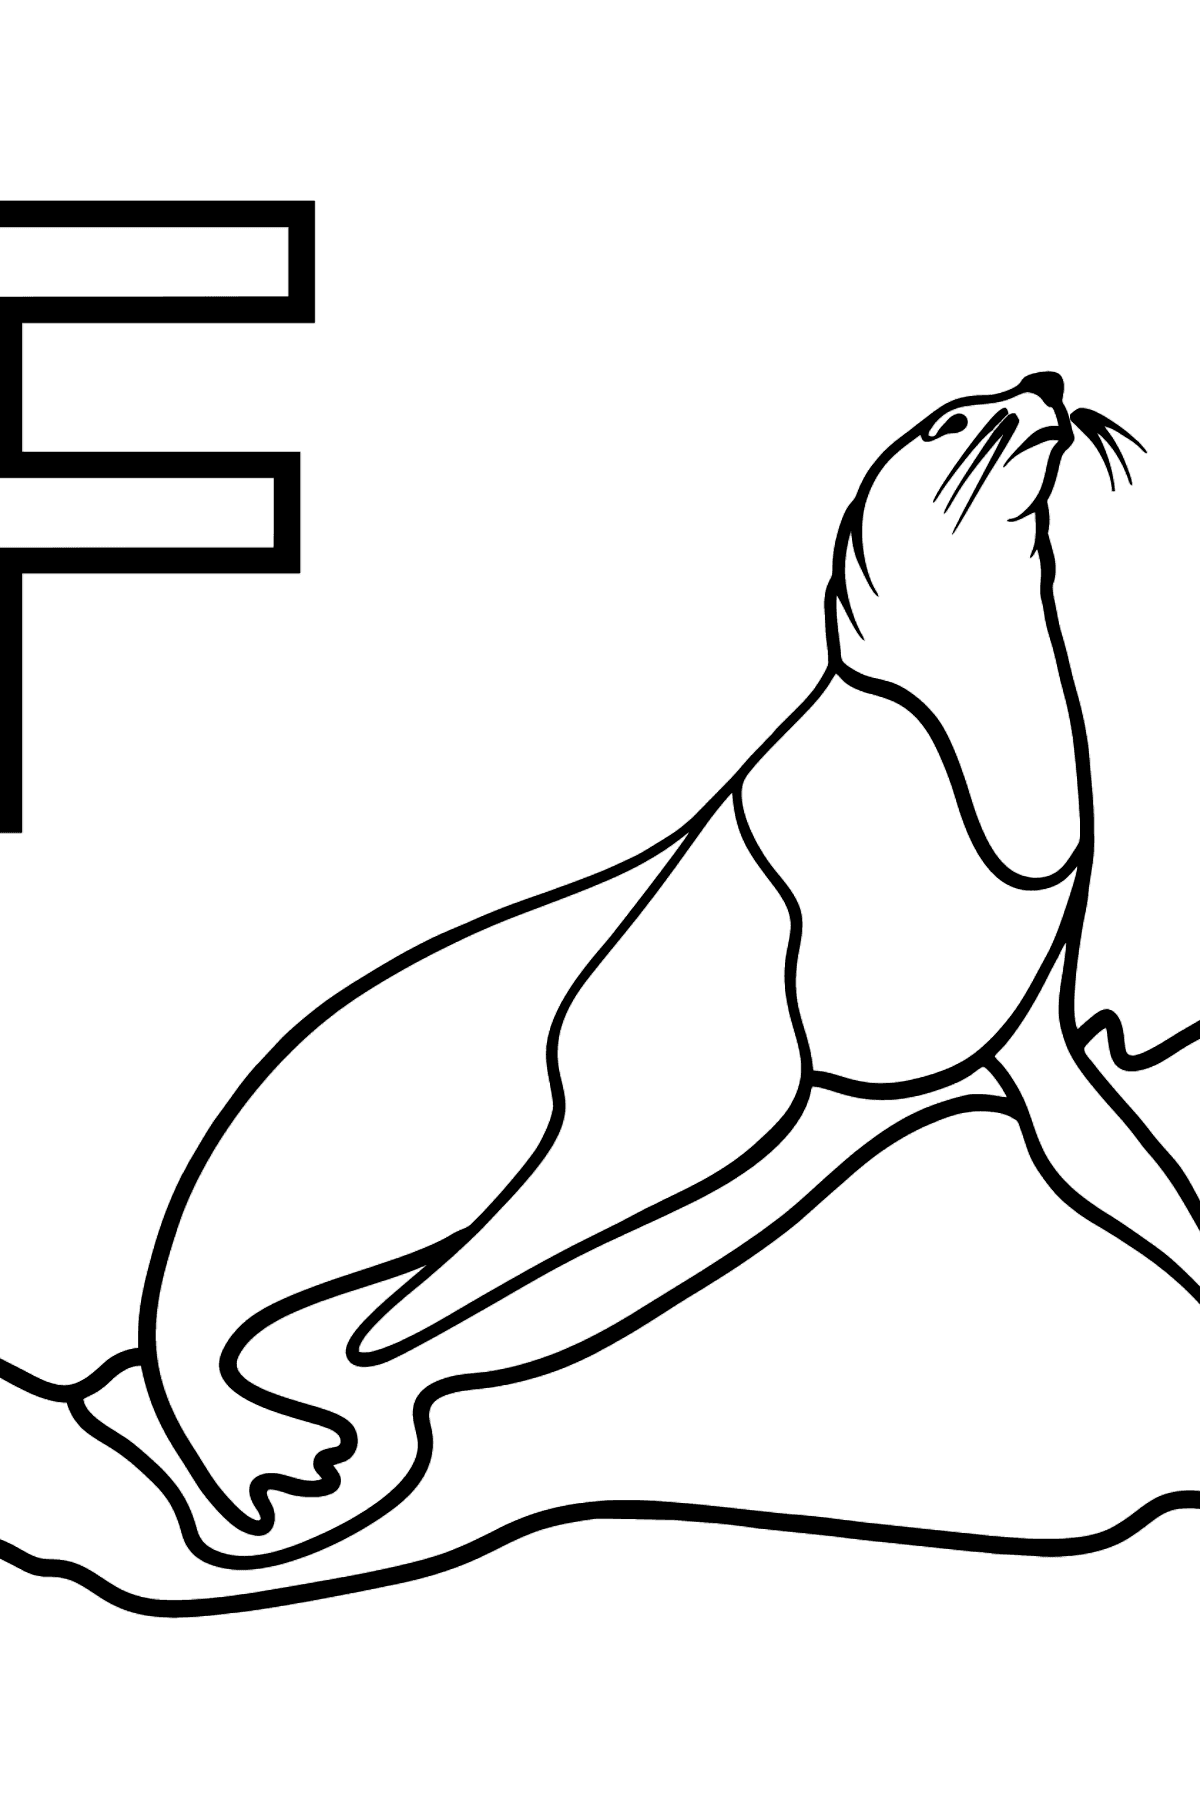 Spanish Letter F coloring pages - FOCA - Coloring Pages for Kids